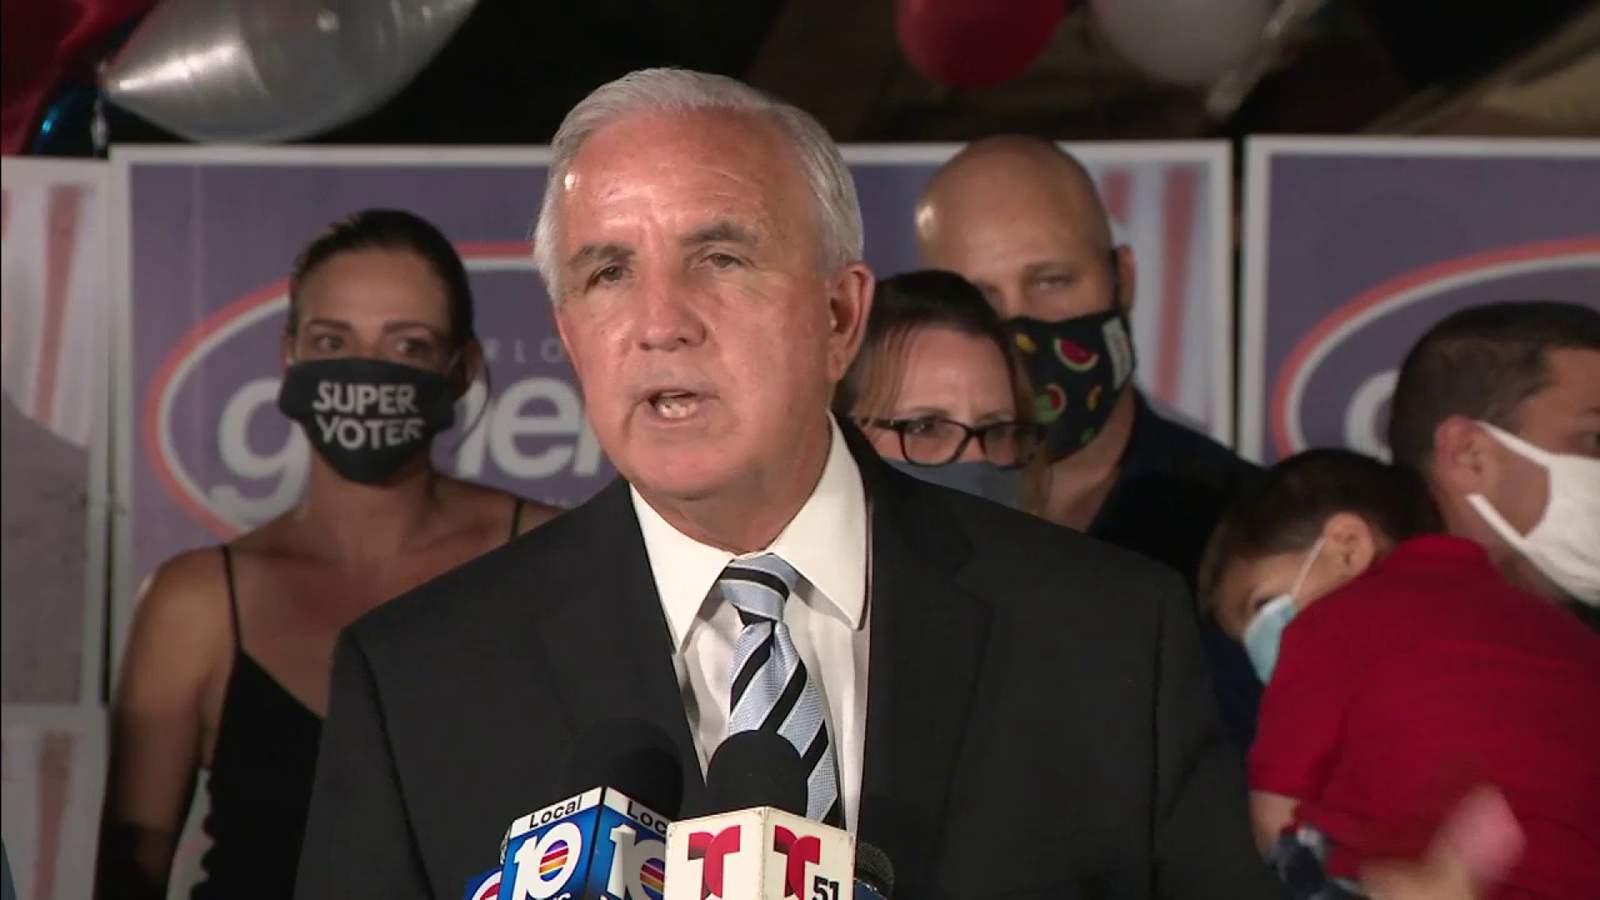 Big upset as former Miami-Dade Mayor Carlos Gimenez unseats incumbent for Congressional seat